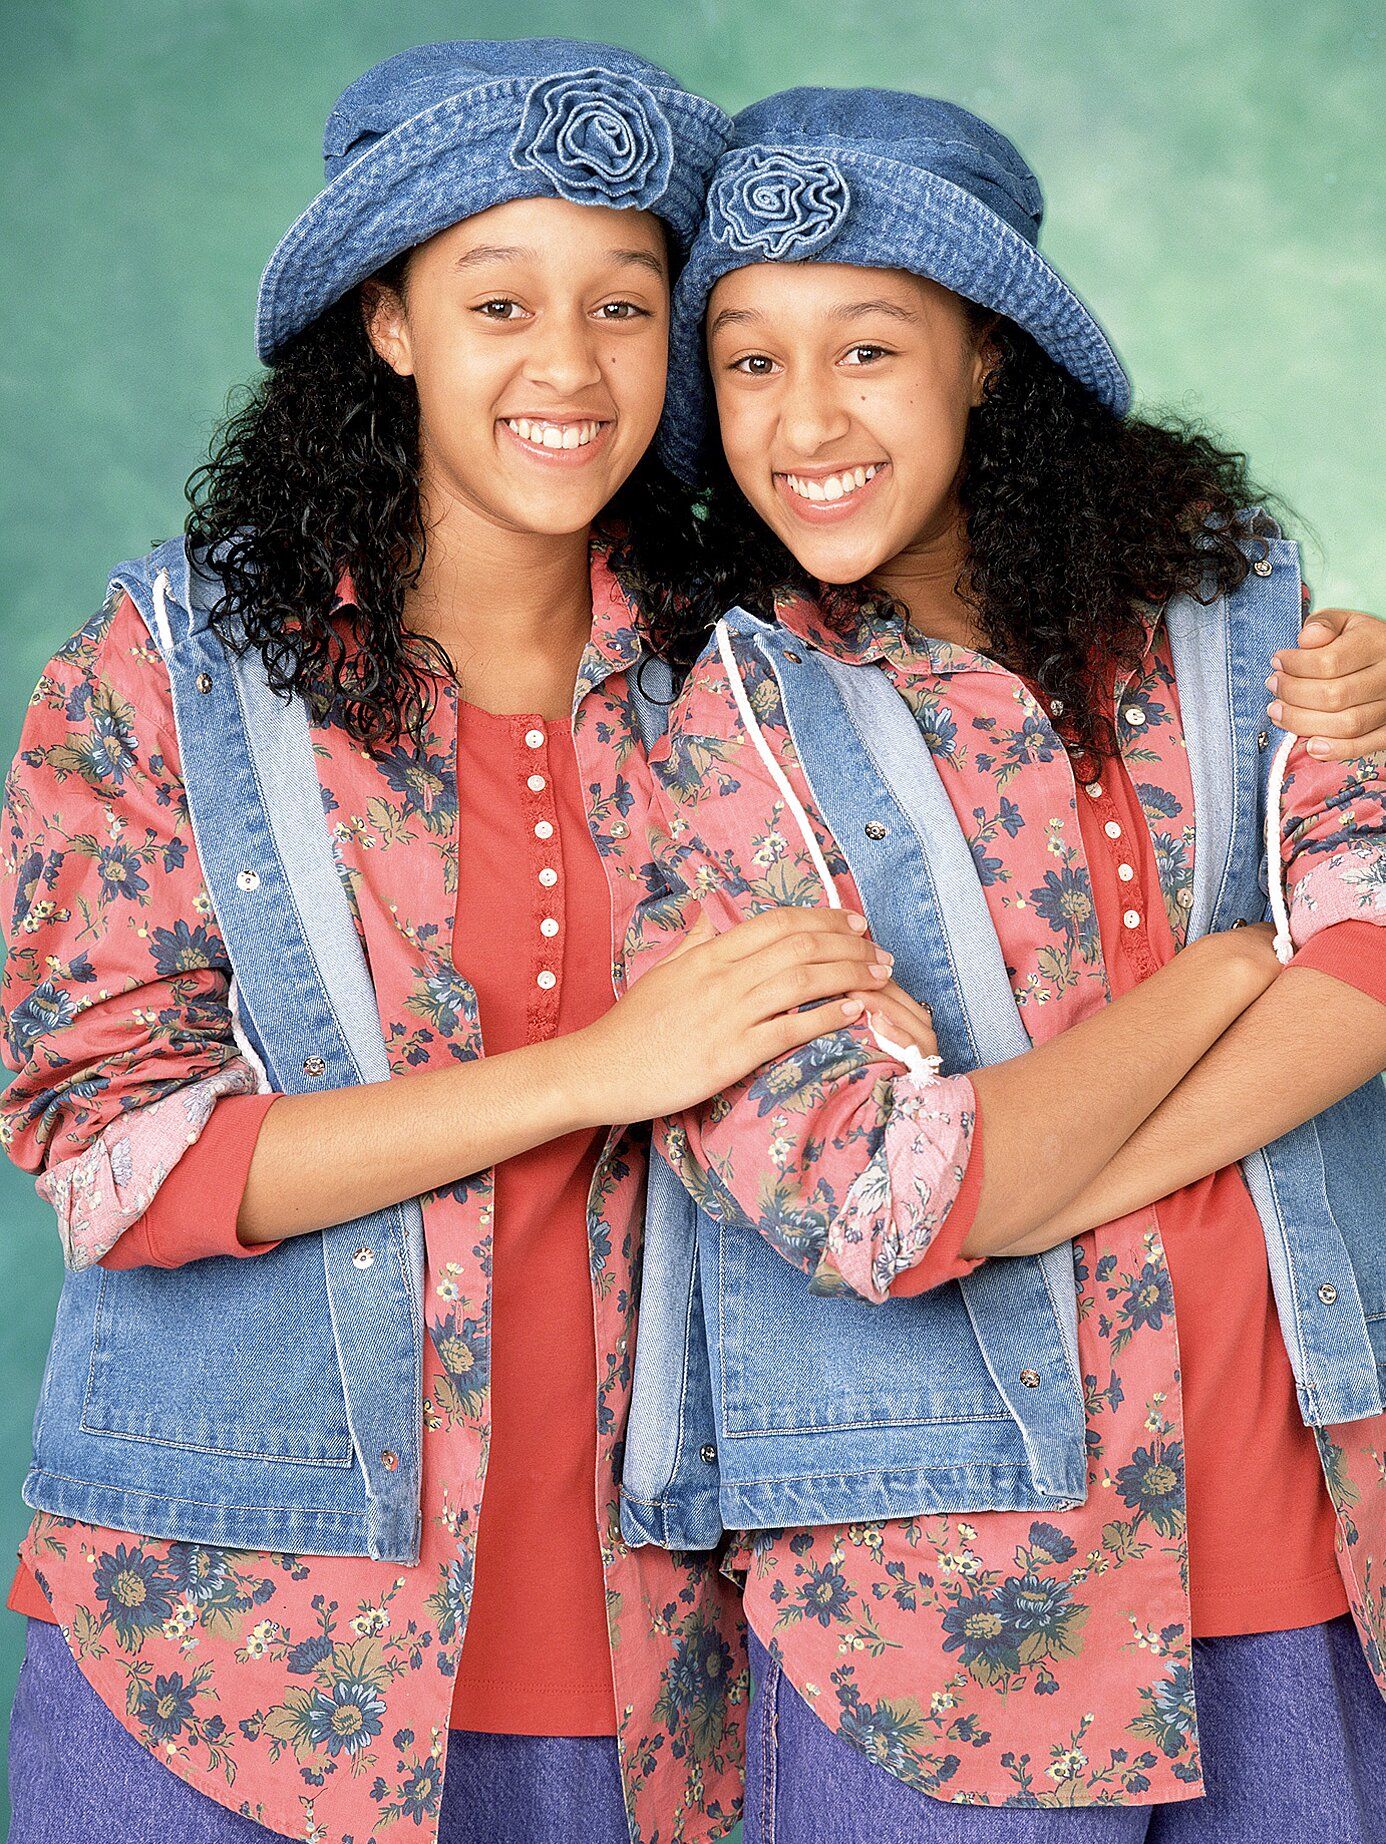 Tia Mowry Says She and Tamera Mowry Were Denied Magazine Cover for Being Black